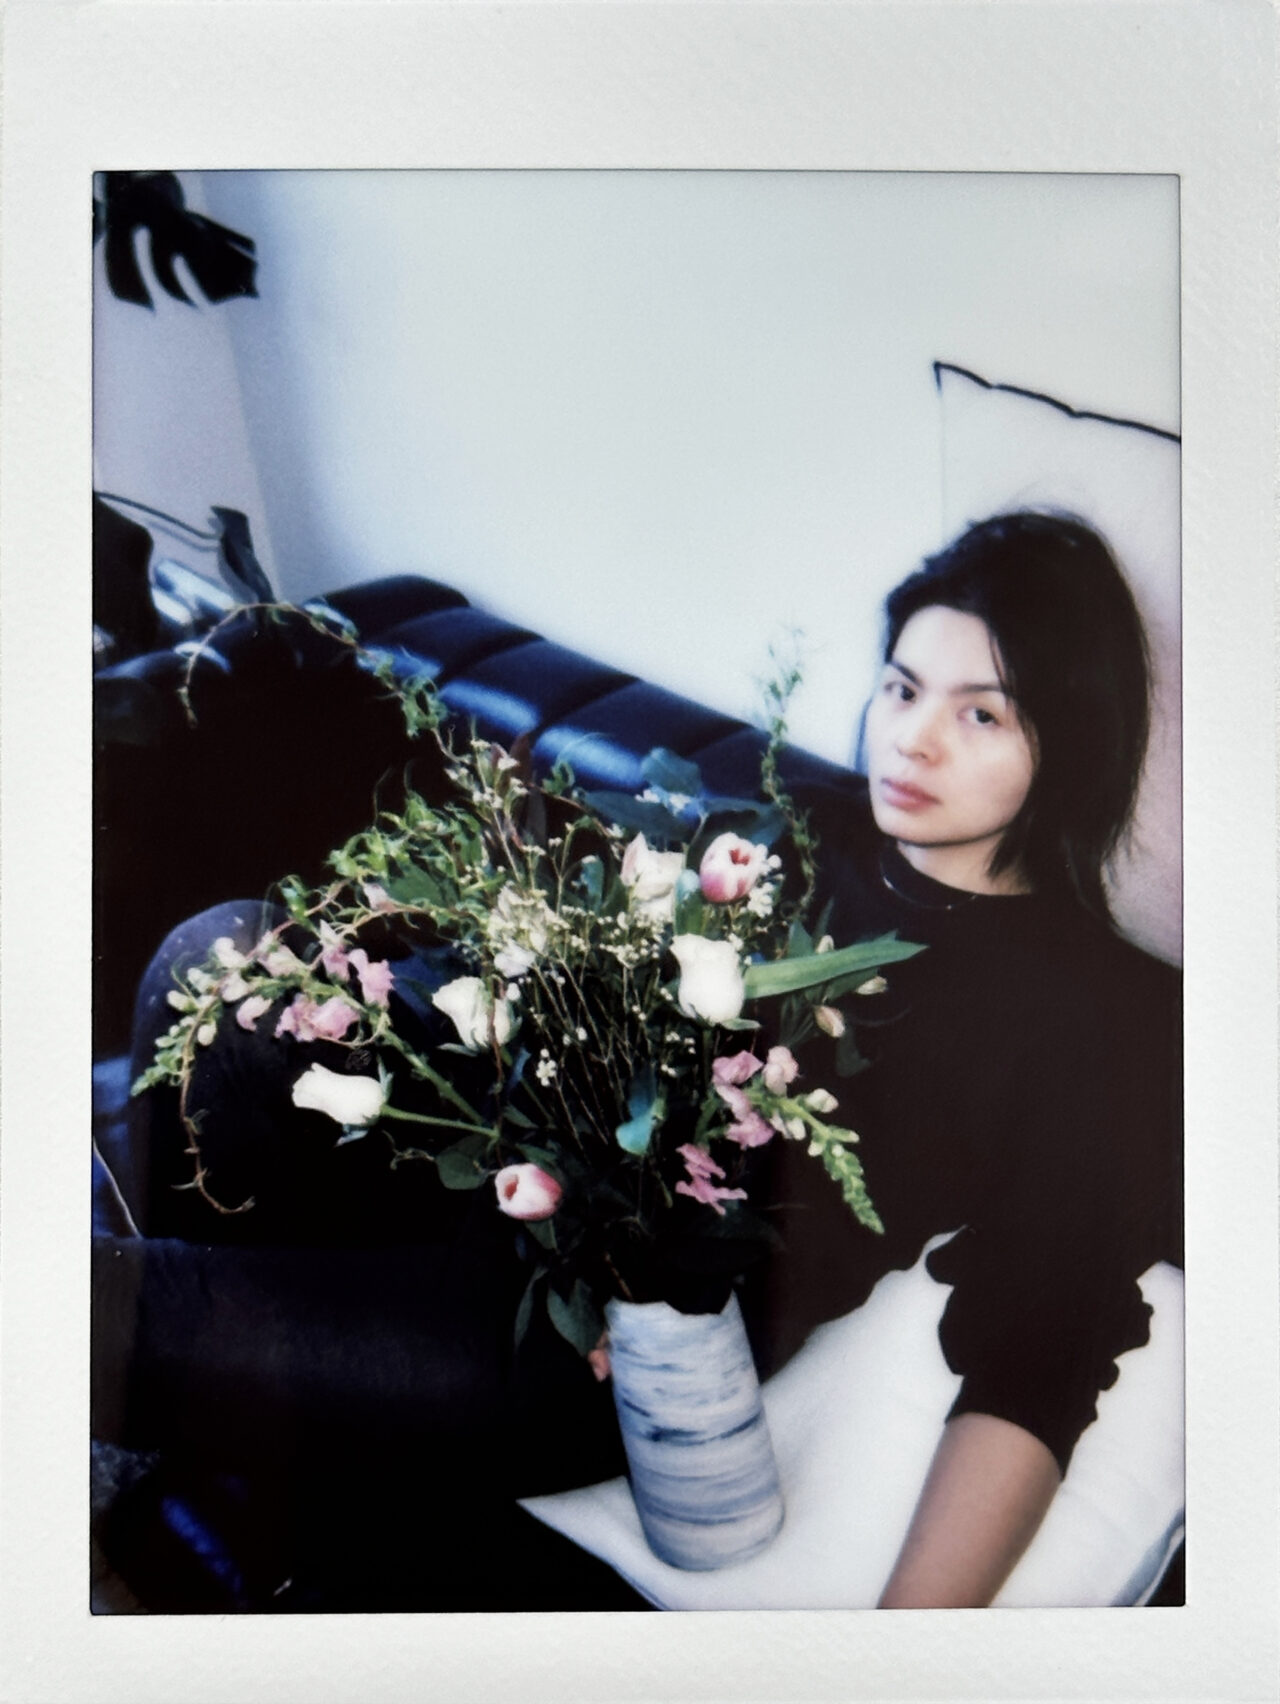 A lo-fi polaroid photo of artist Doreen Chan, sitting on a black leather sofa behind a bouquet of light pink and white flowers.